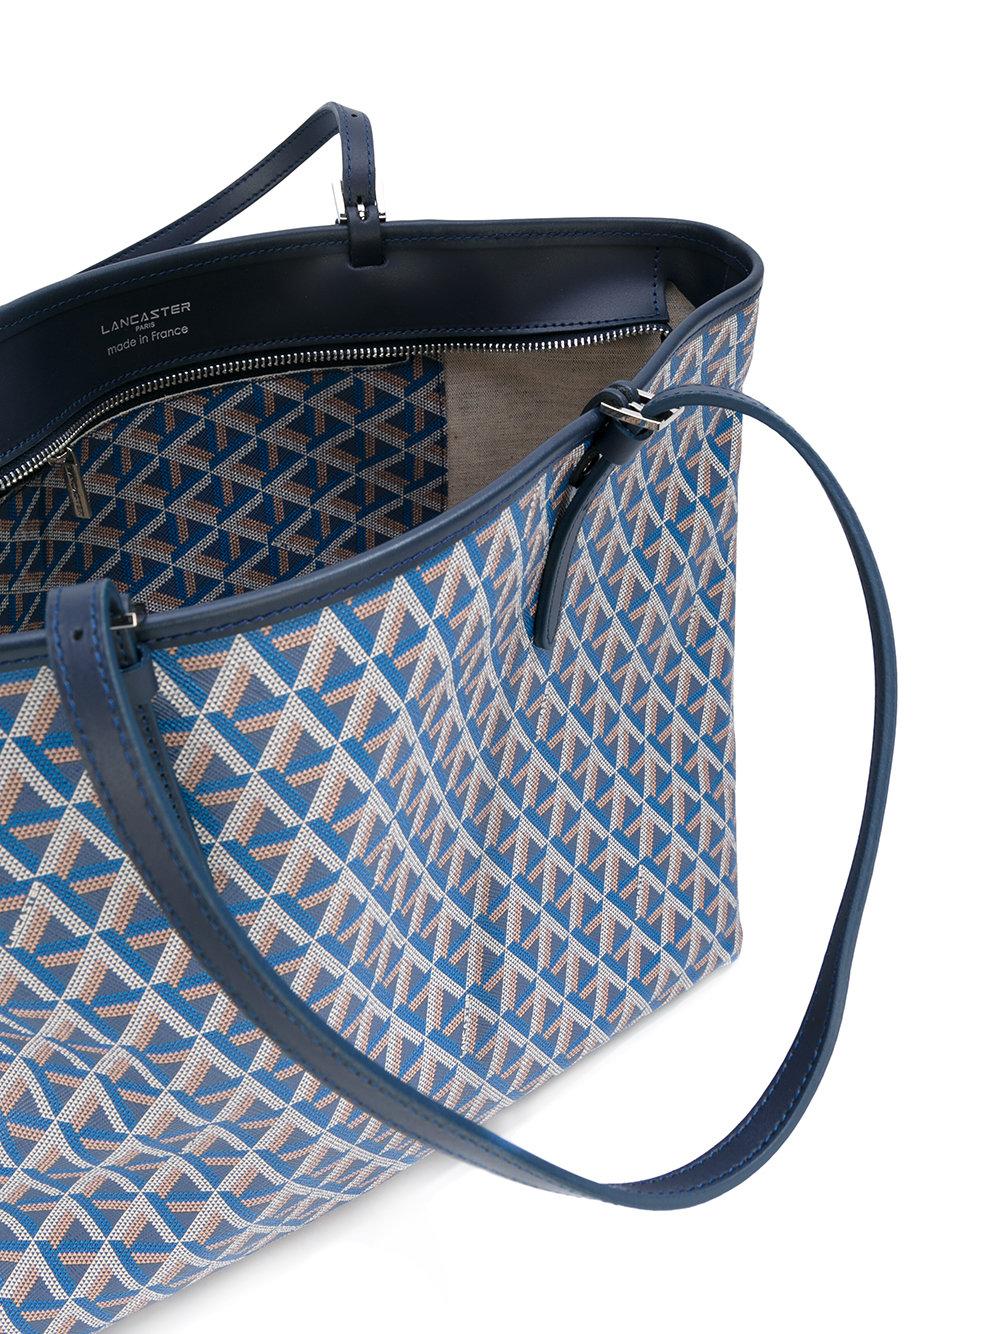 Lancaster Ikon Tote in Blue | Lyst